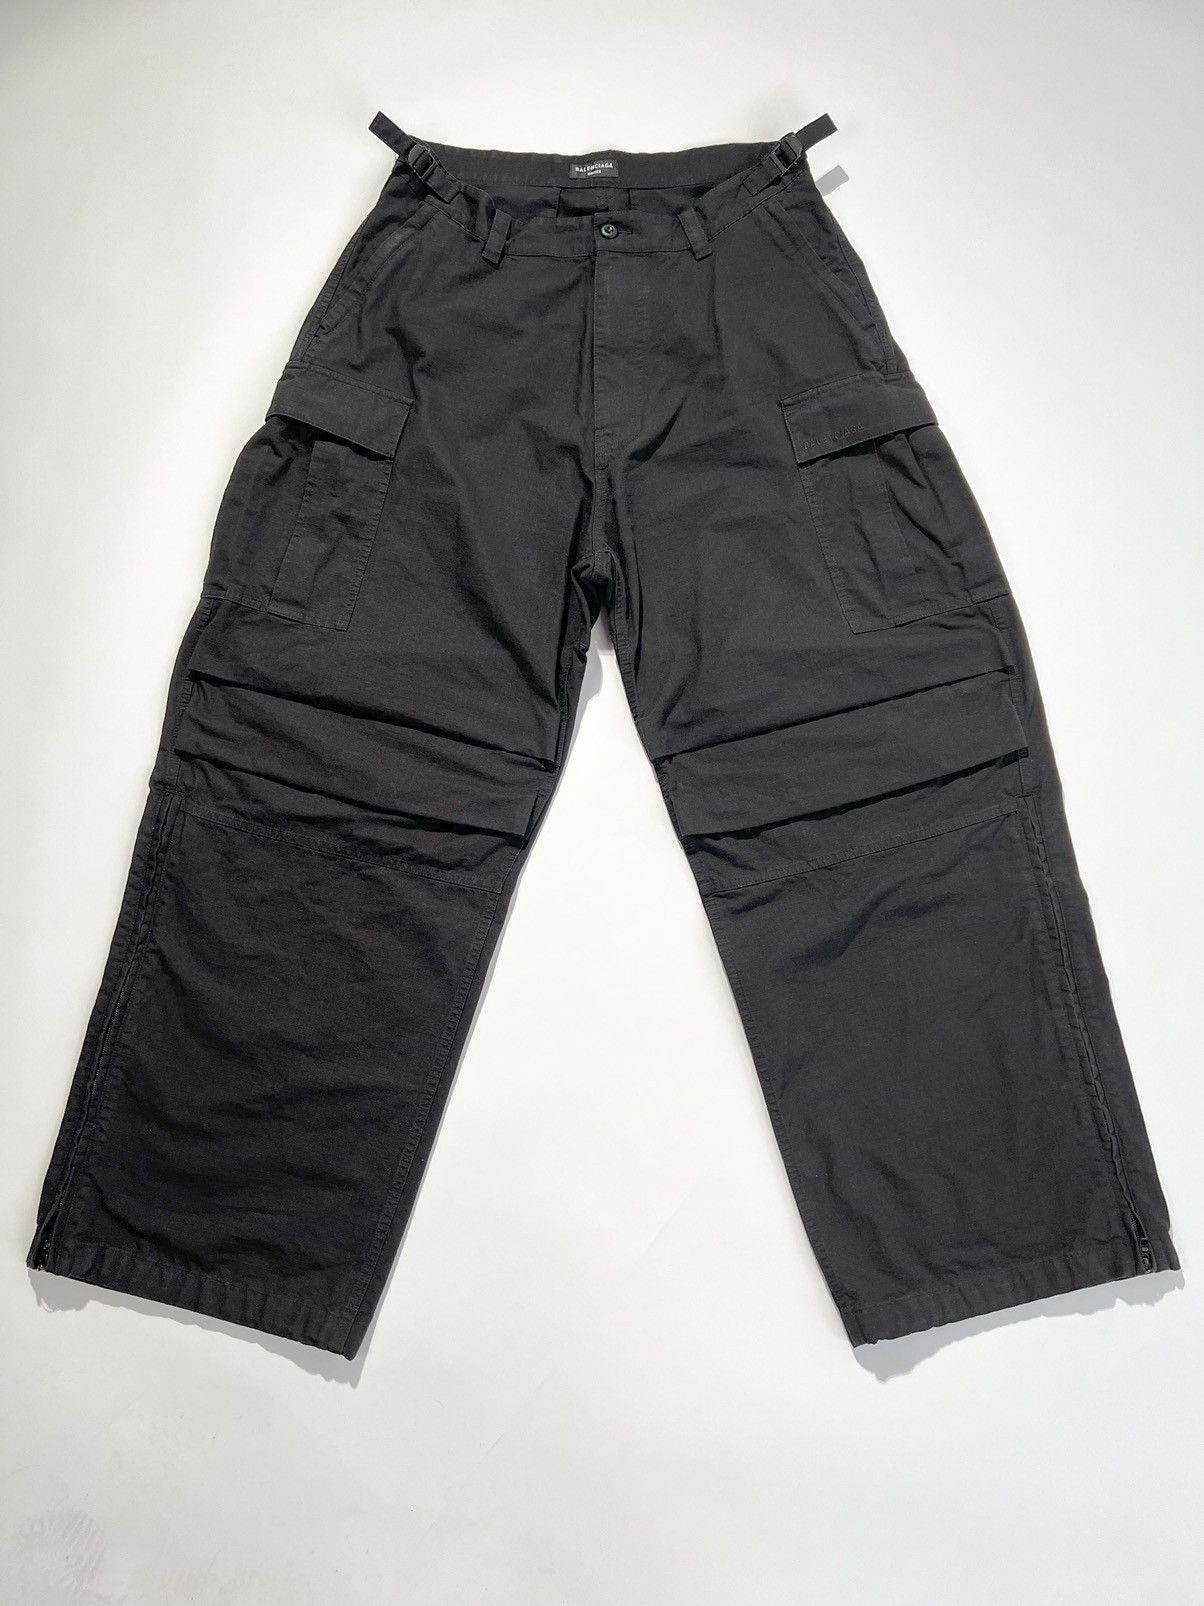 Balenciaga Fall 22 ‘The Lost Tape’ Pulled Cargo Pants in Black | Grailed